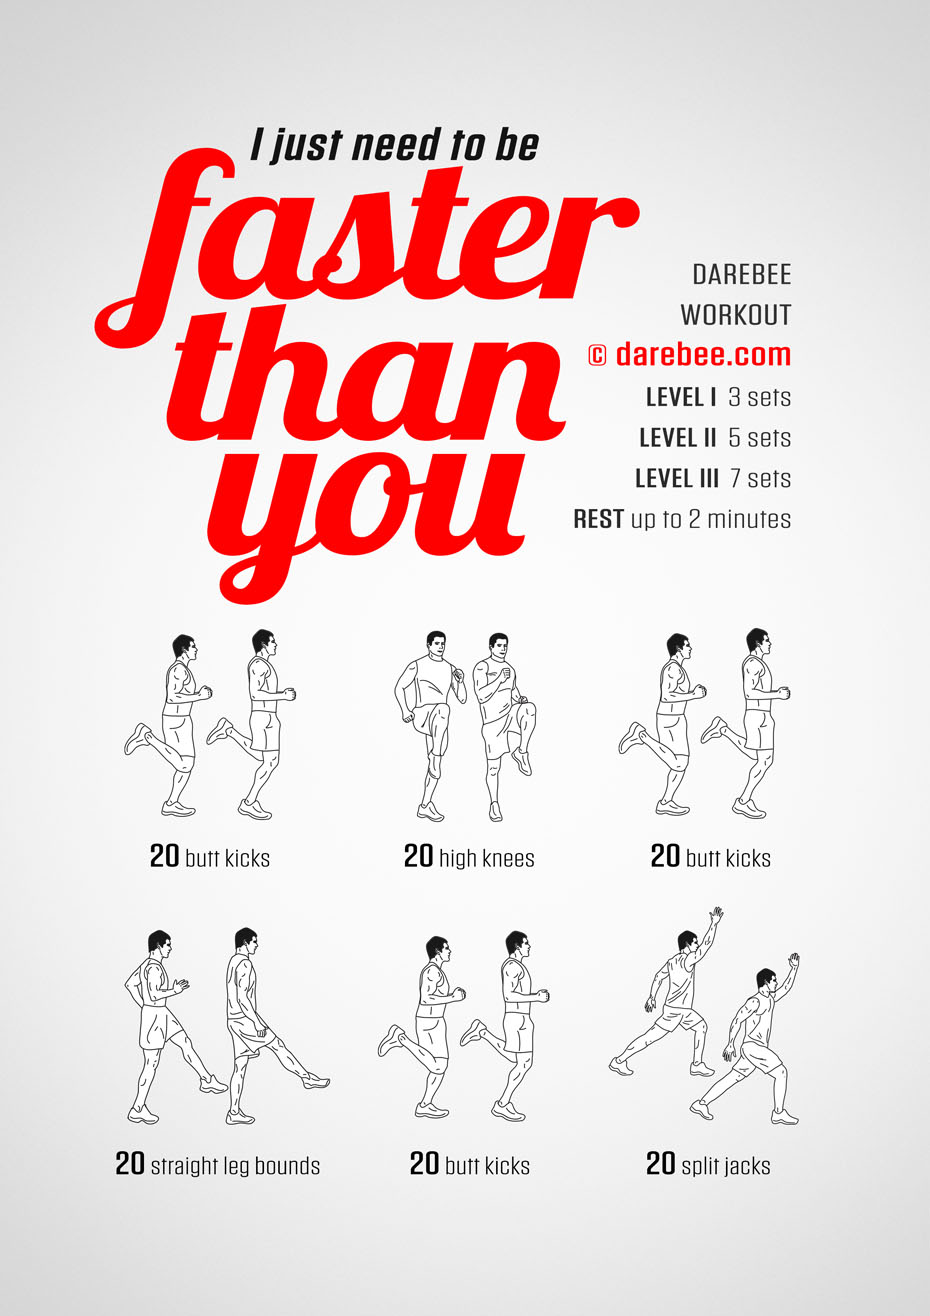 I Just Need To Be Faster Than You is a Darebee home fitness workout that will help you be faster. 